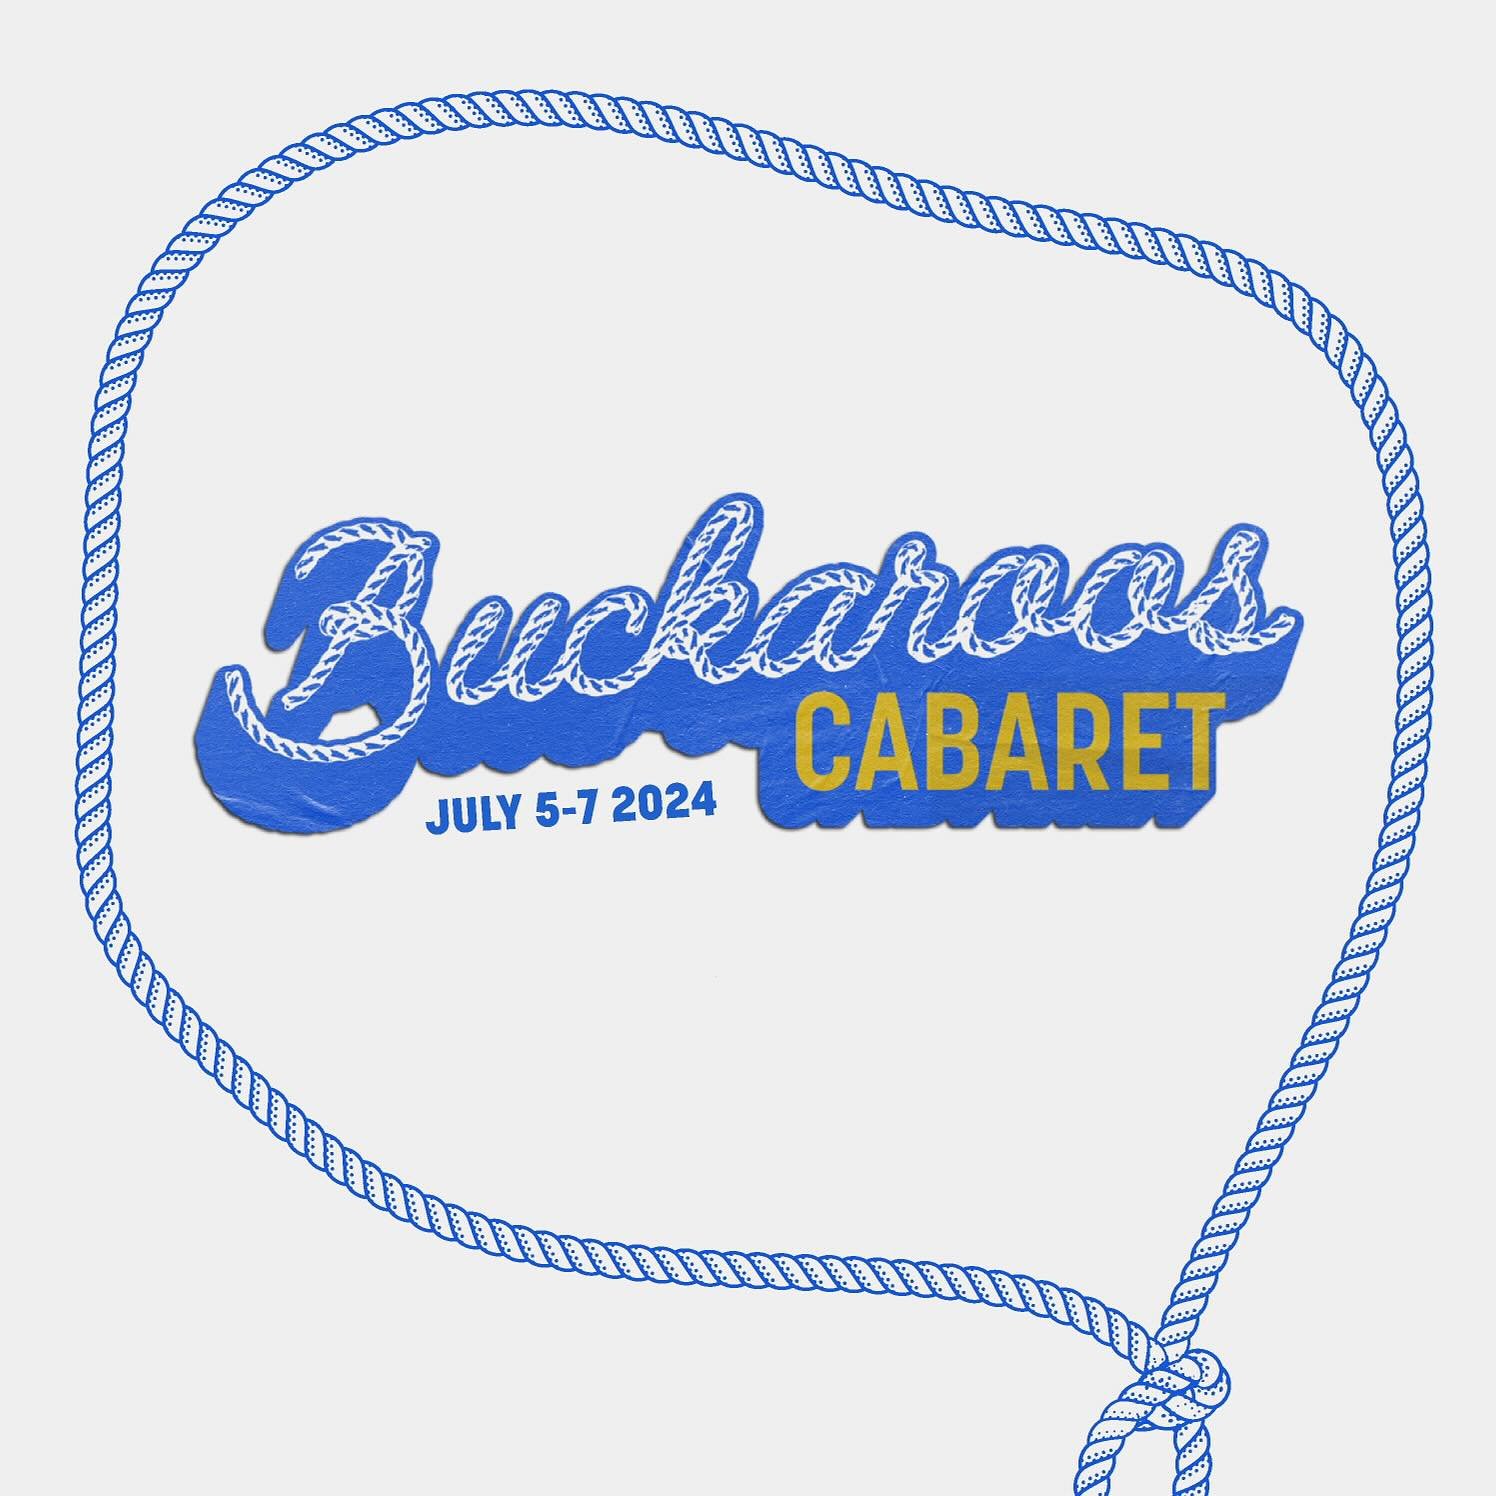 BUCKAROOS CABARET 🐎🪩

Join us for the best post rodeo cabaret in the city live only at Buckaroos from July 5 - 7, 2024.

#LetErBuck